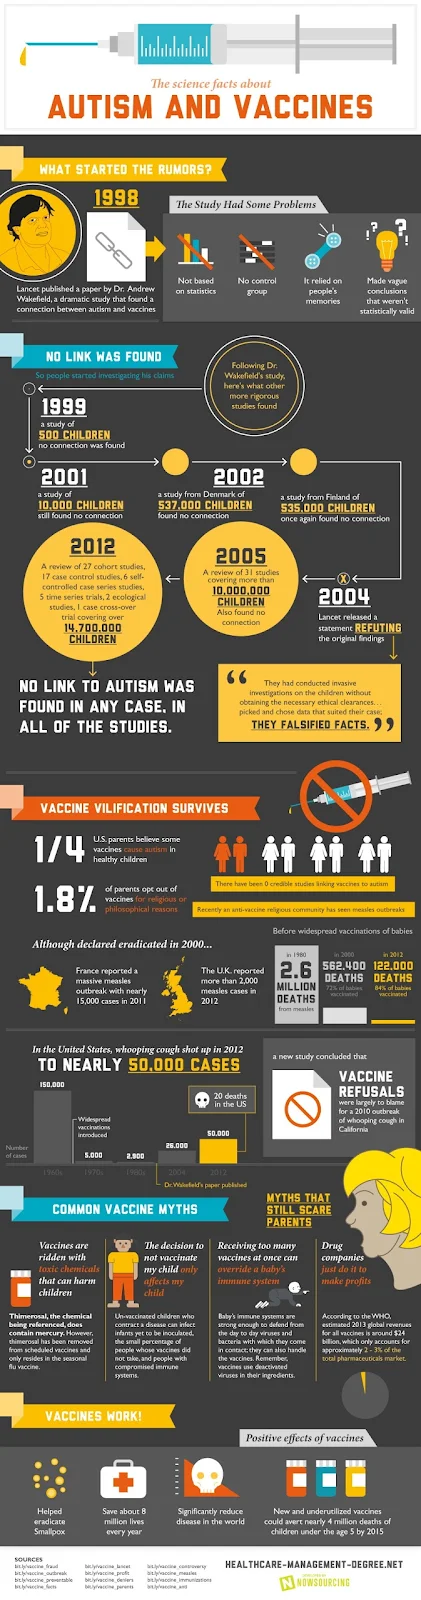 Autism and vaccines